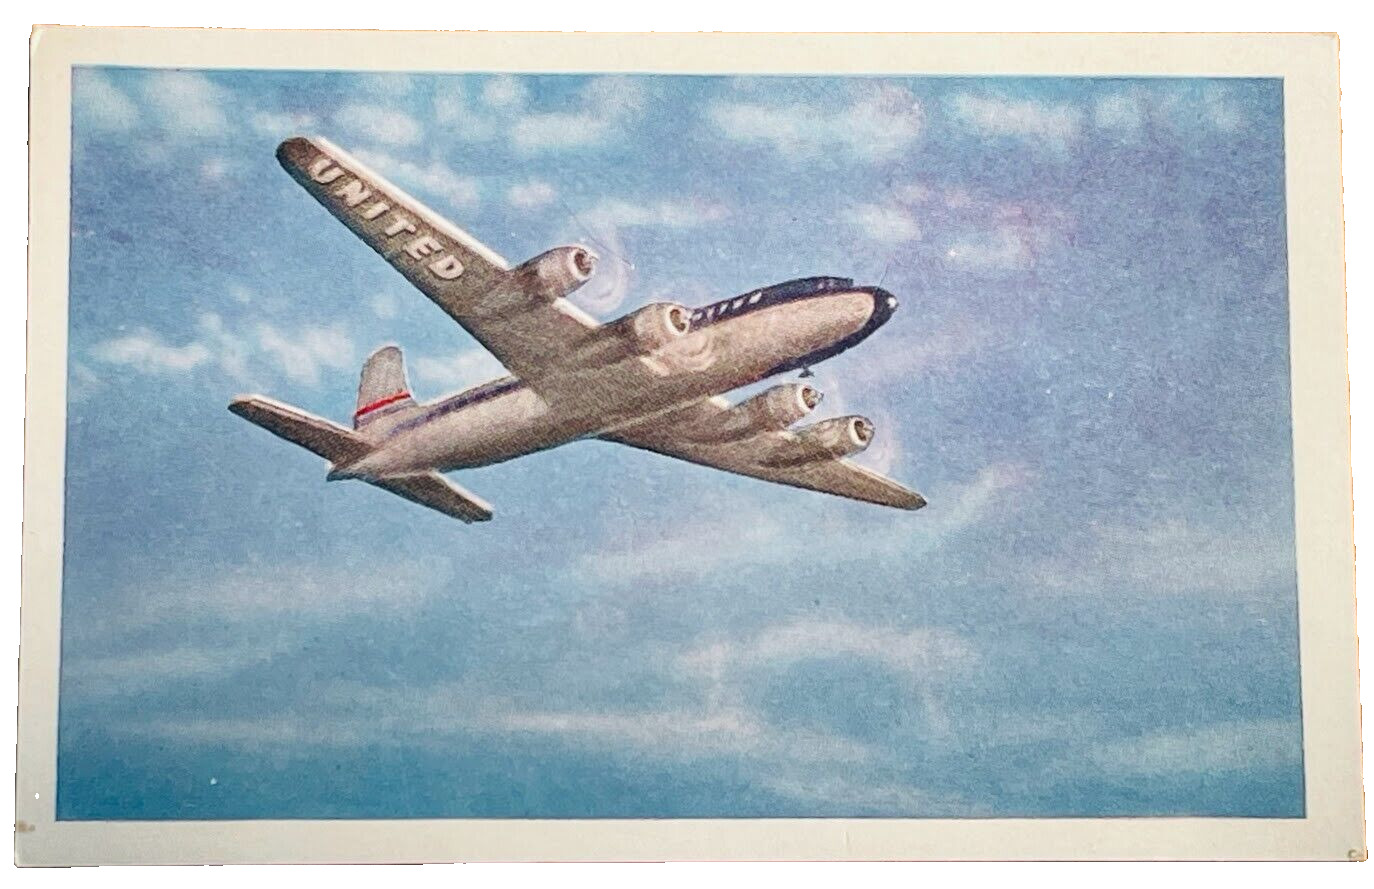 UNITED AIRLINES Photo Postcard unposted Original Vintage Airlines Airplane Plane